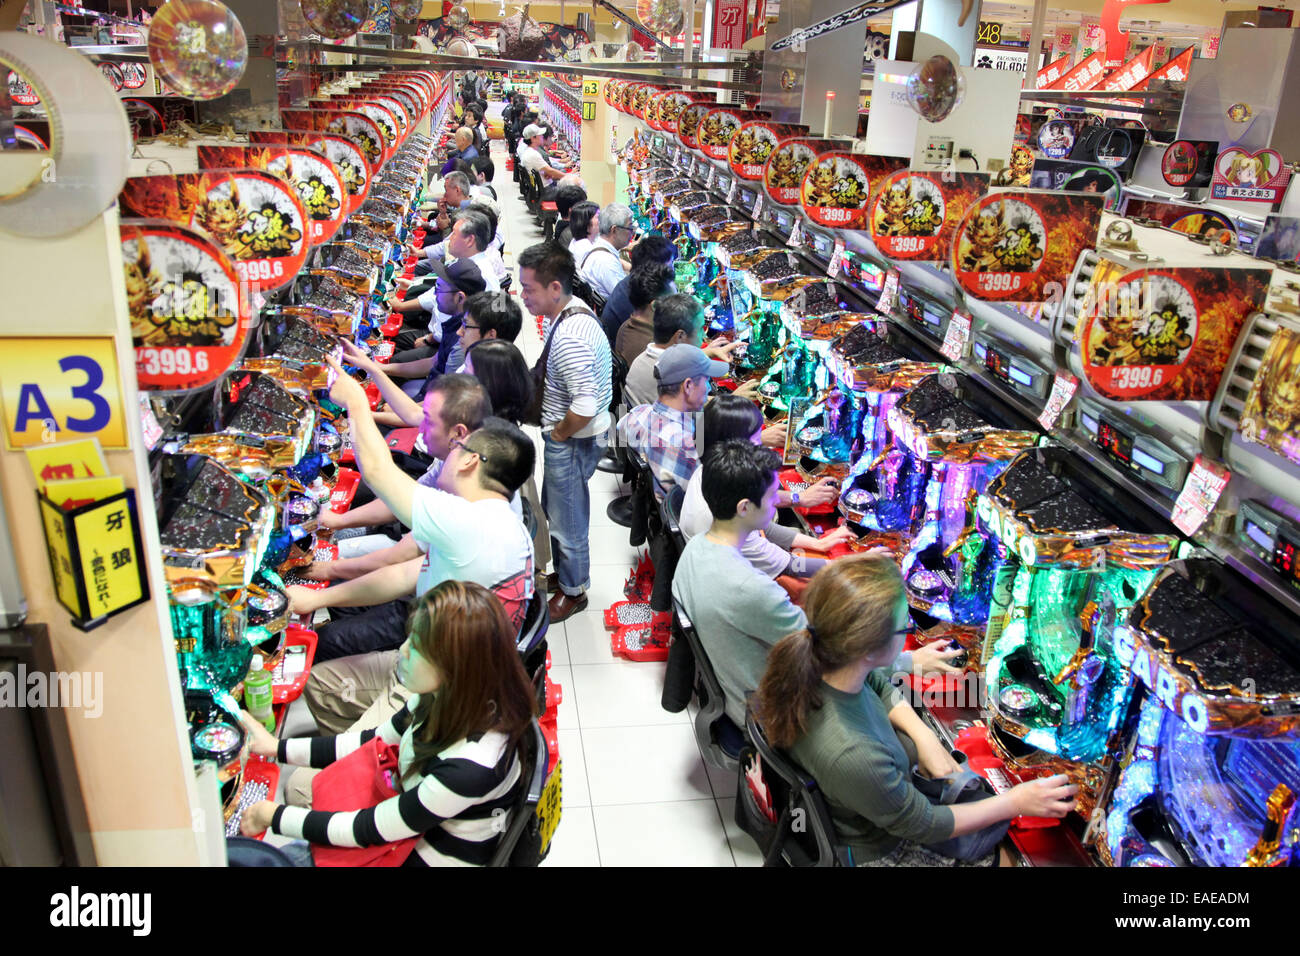 Guests pictured in a pachinko arcade in Tokyo, September 28, 2014. Pachinko is a typical Japanese slot game. Photo: Friso Gentsch/dpa Stock Photo